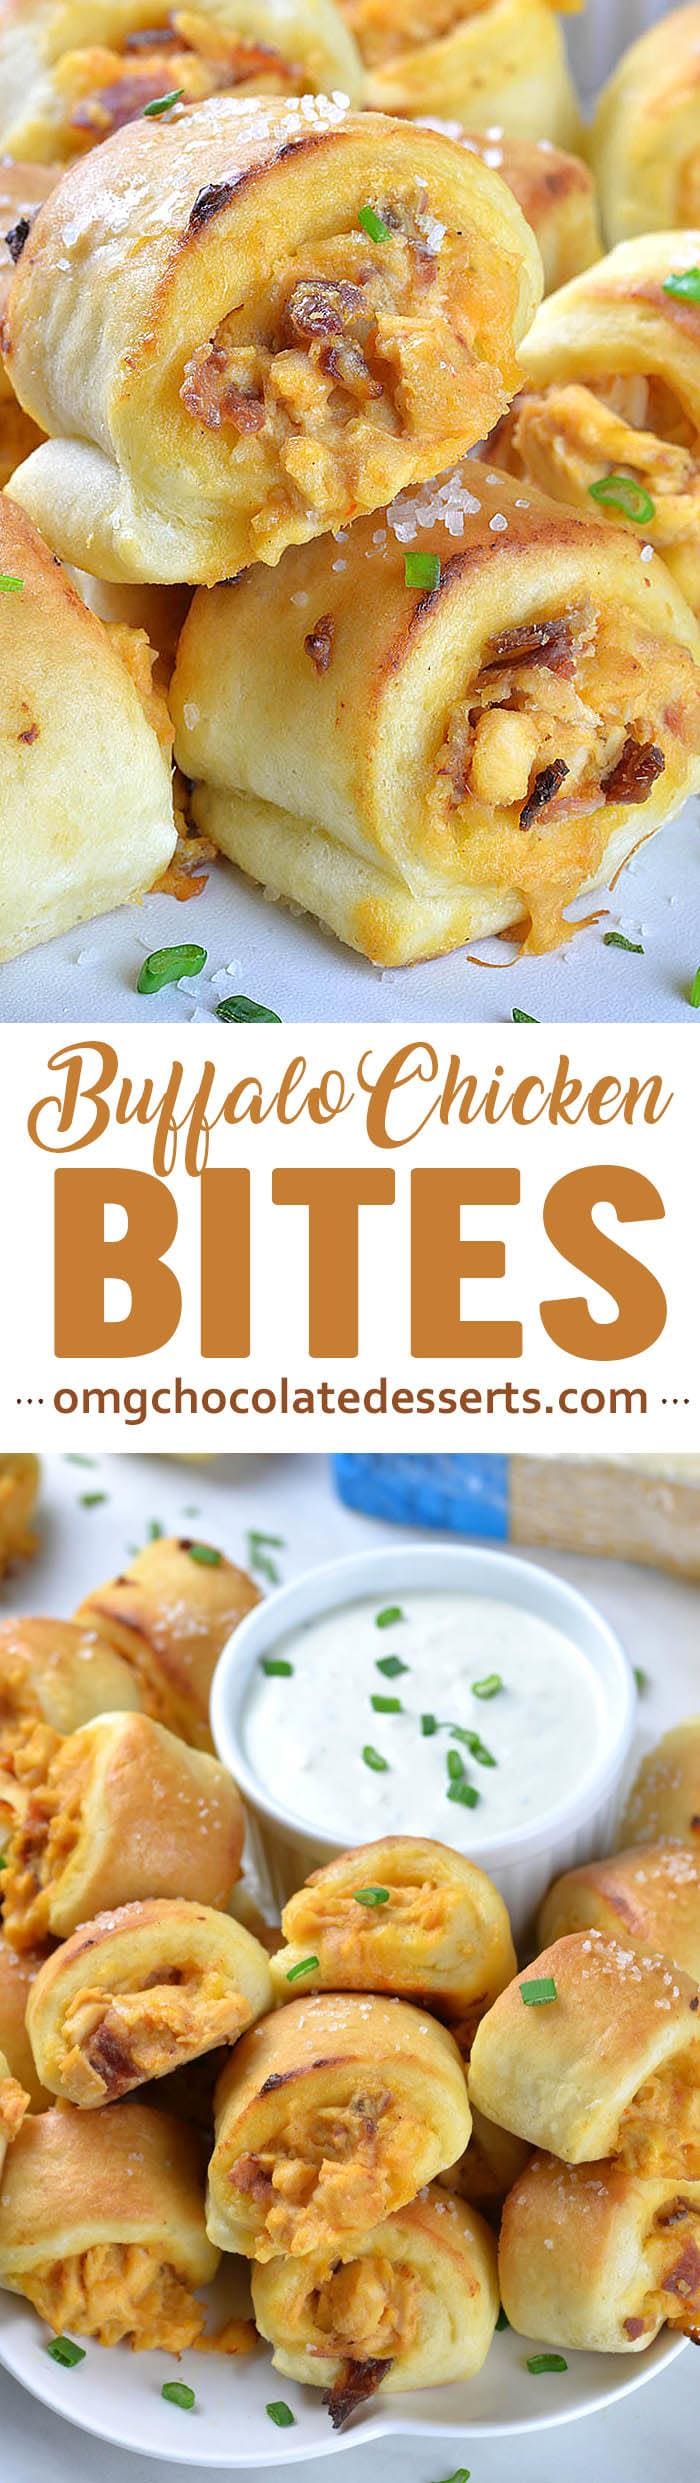 Buffalo Chicken Bites with Blue Cheese Dip are perfect appetizer for Super Bowl party food menu! These are delicious football snack for all buffalo chicken lovers!